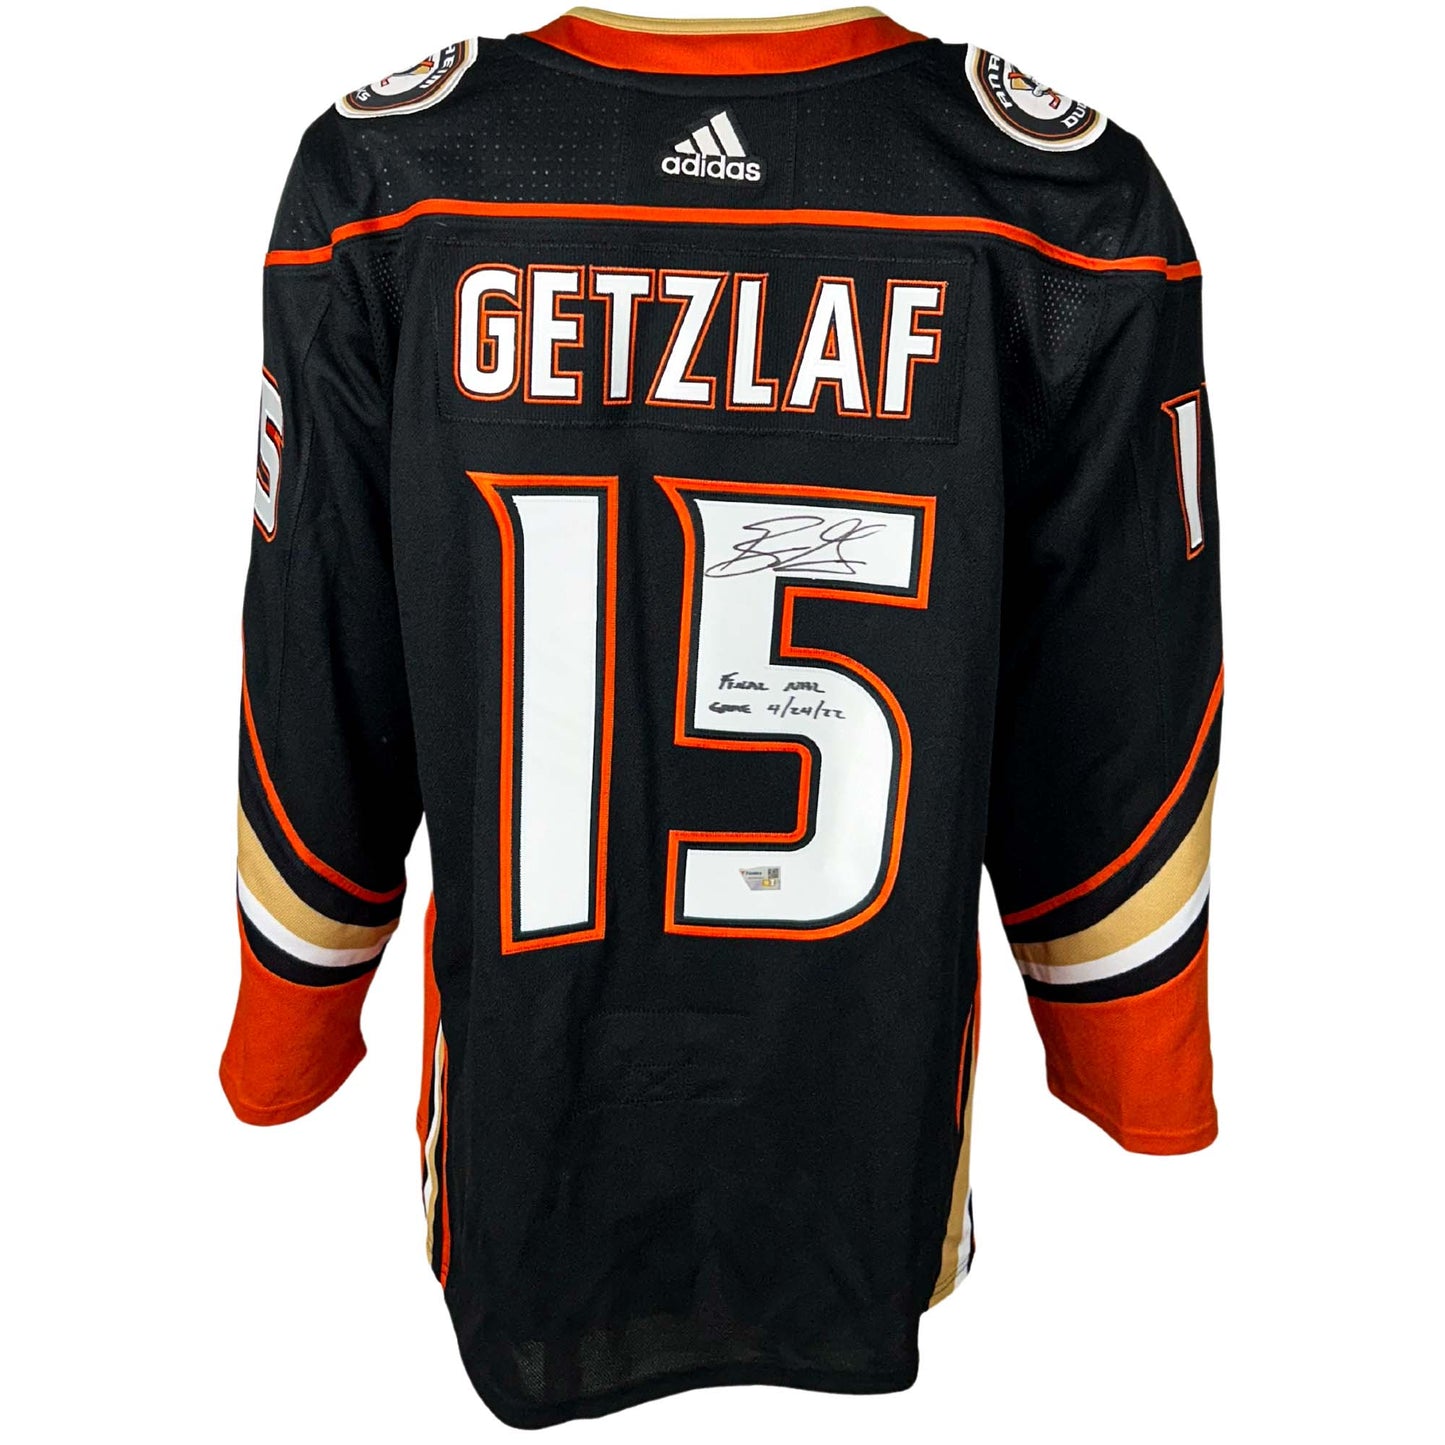 Mighty Duck Signed Ryan Getzlaf Jersey Back